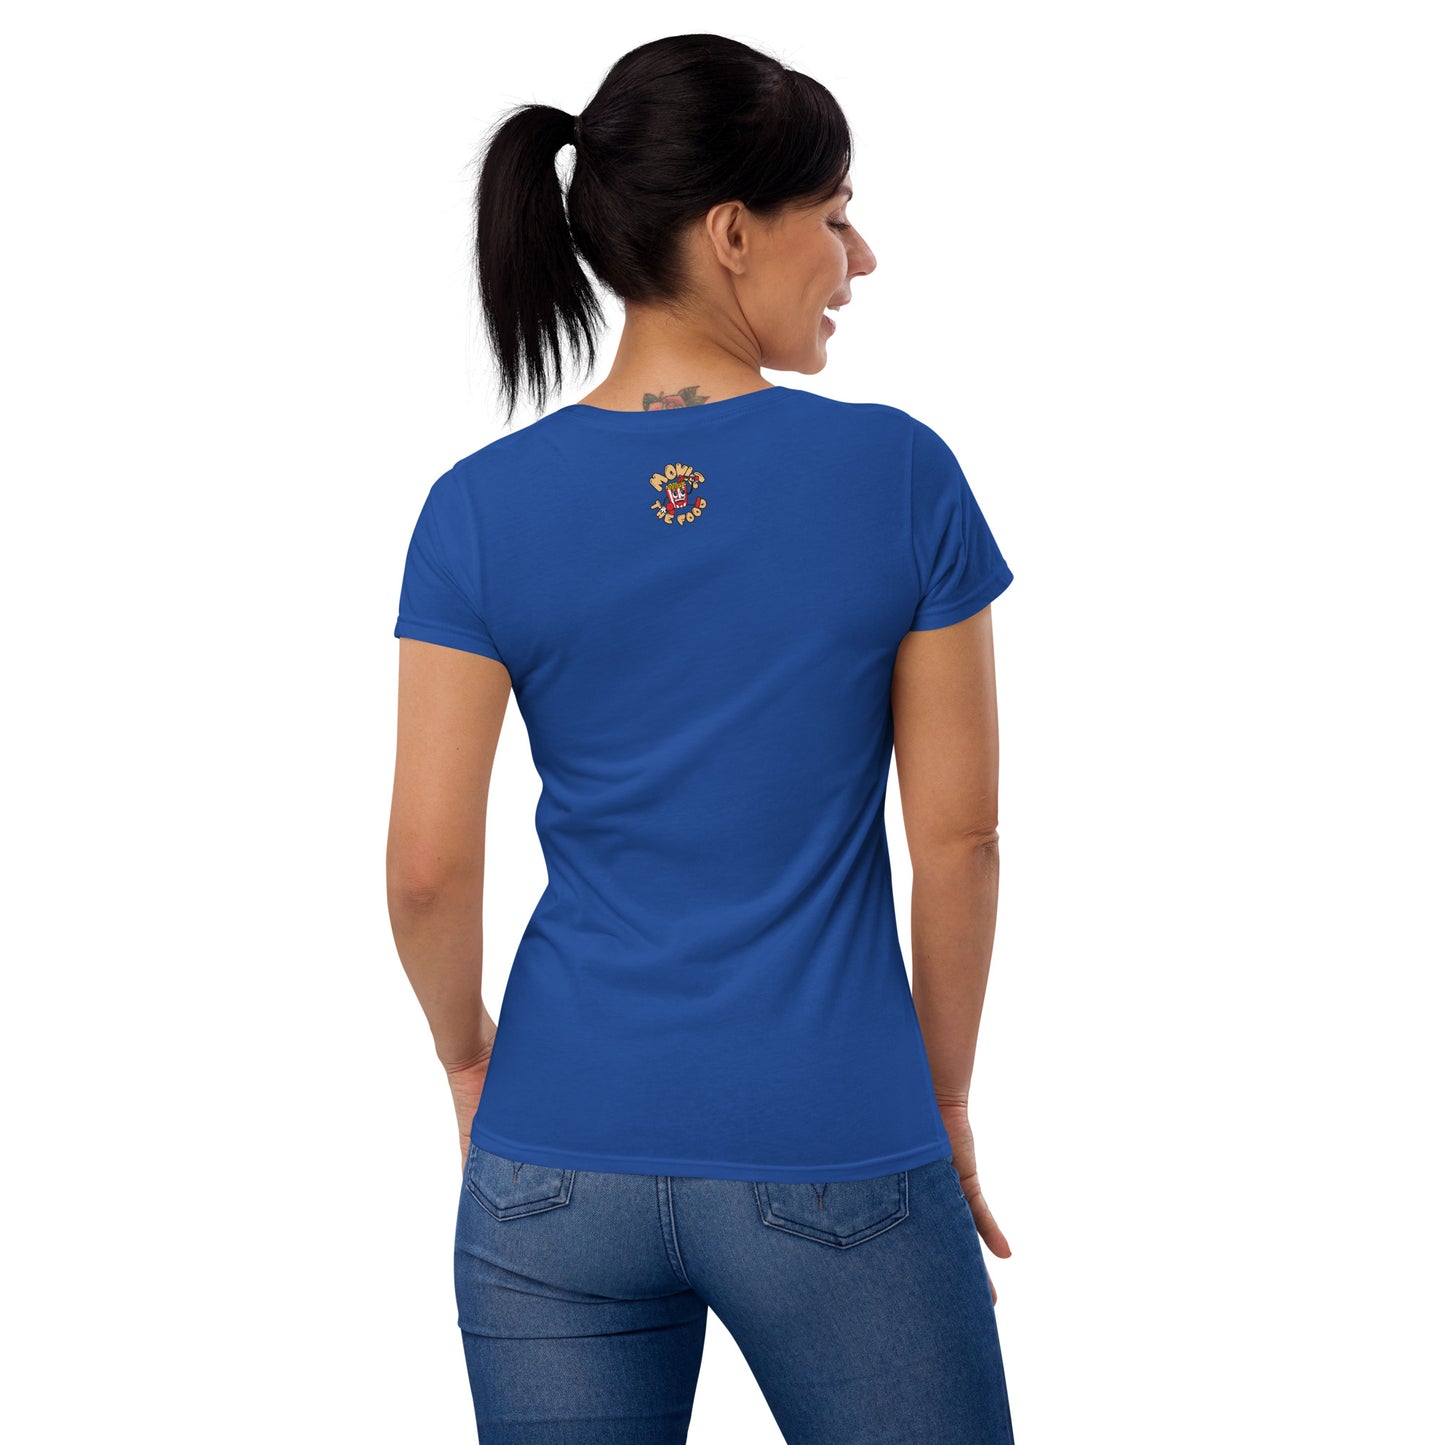 Movie The Food - All Hotdogs Go To Heaven Women's T-Shirt - Royal Blue - Model Back